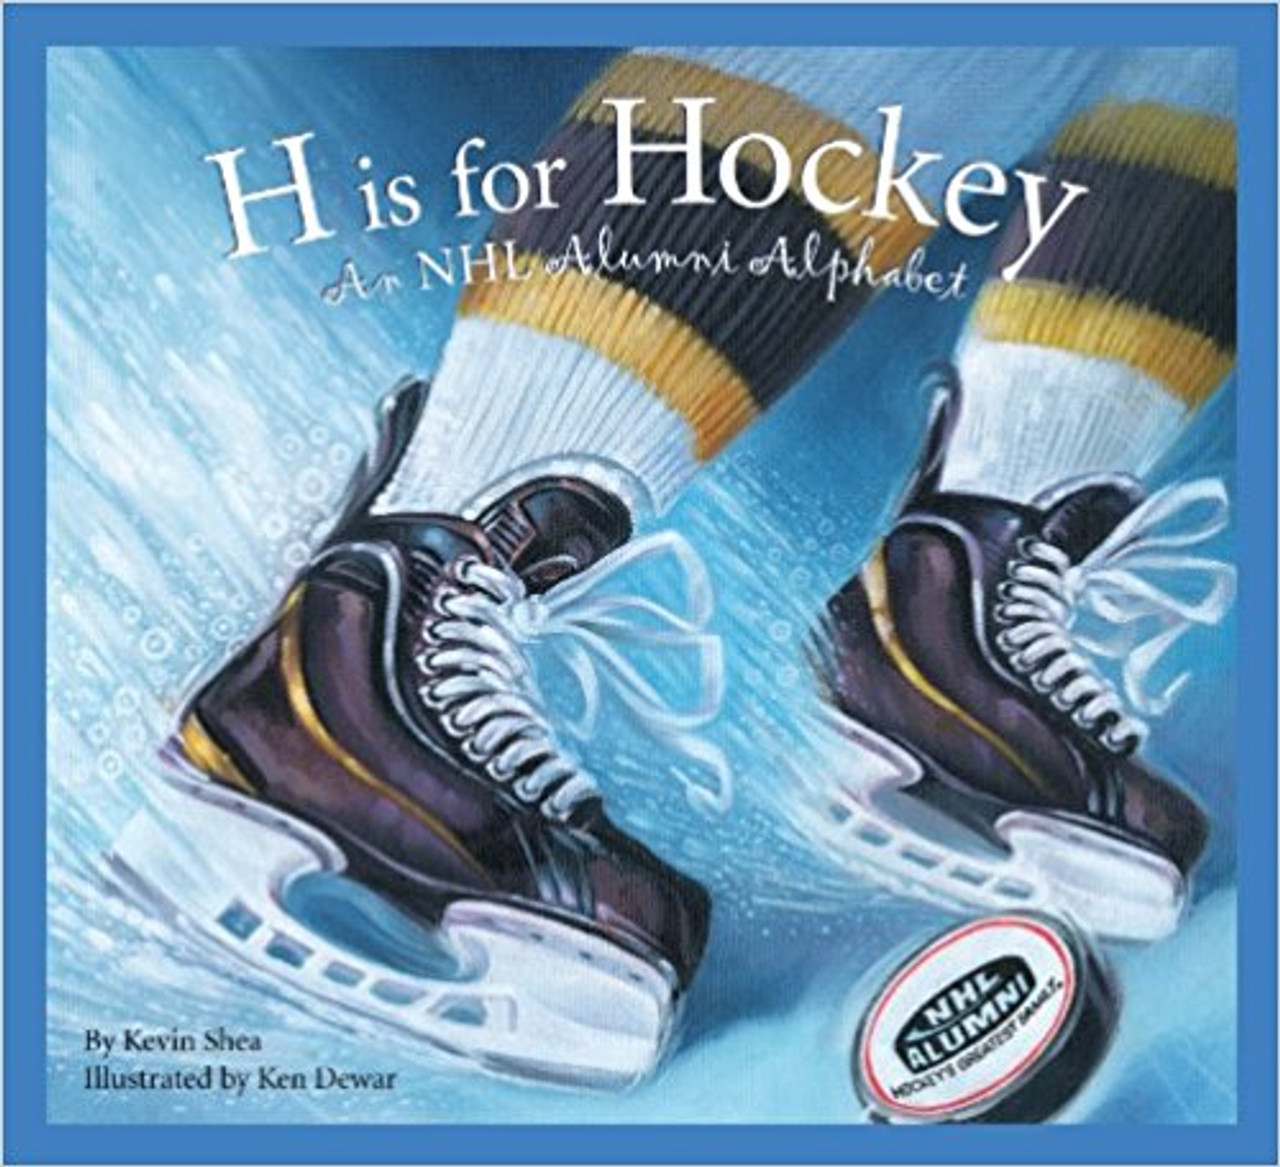 H is for Hockey: An NHL Alumni Alphabet by Kevin Shea